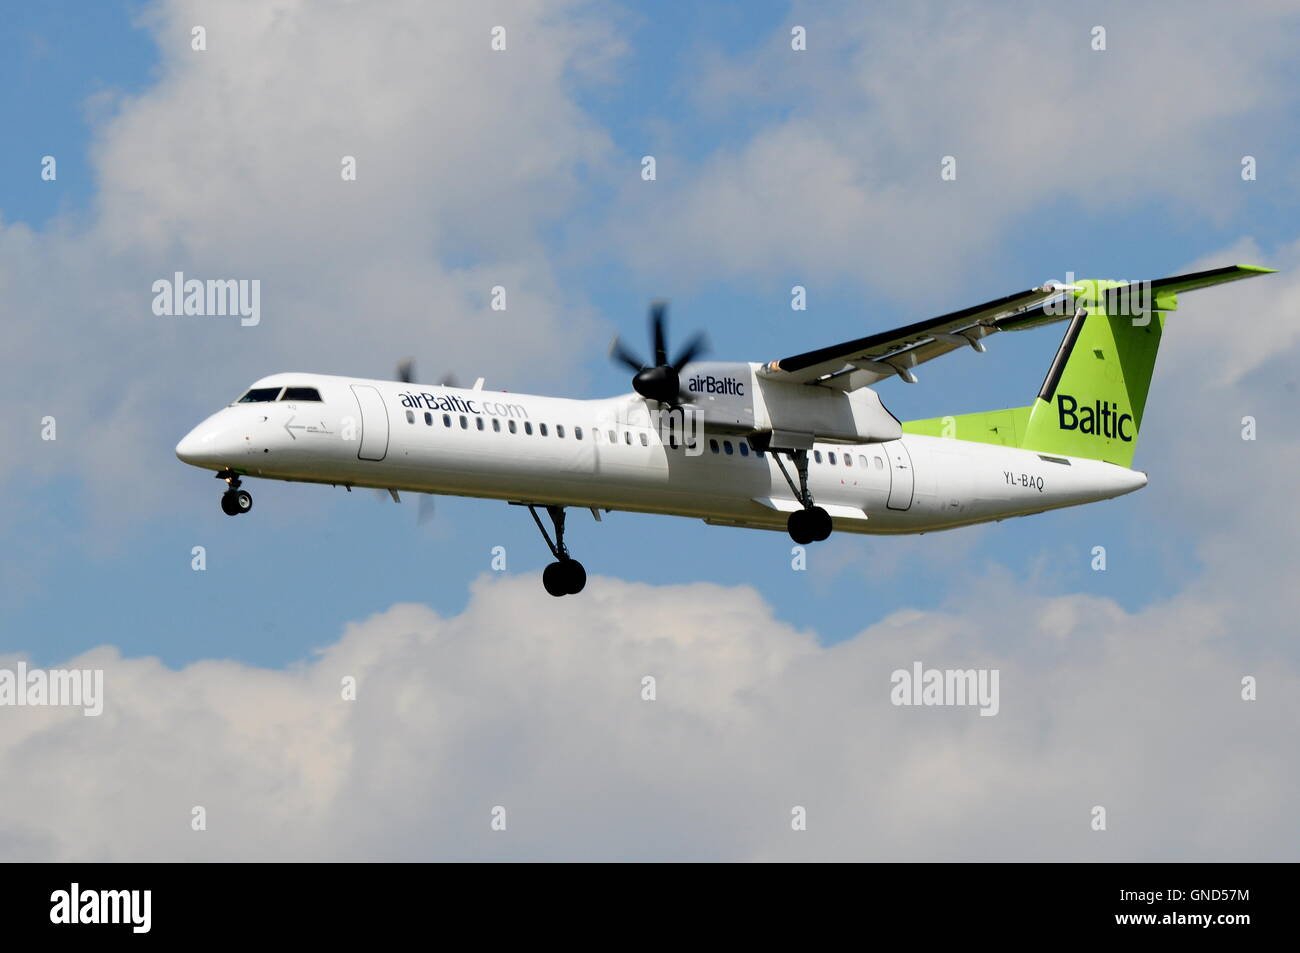 Bombardier, avion DHC8, YL-BAQ, Air Baltic Banque D'Images